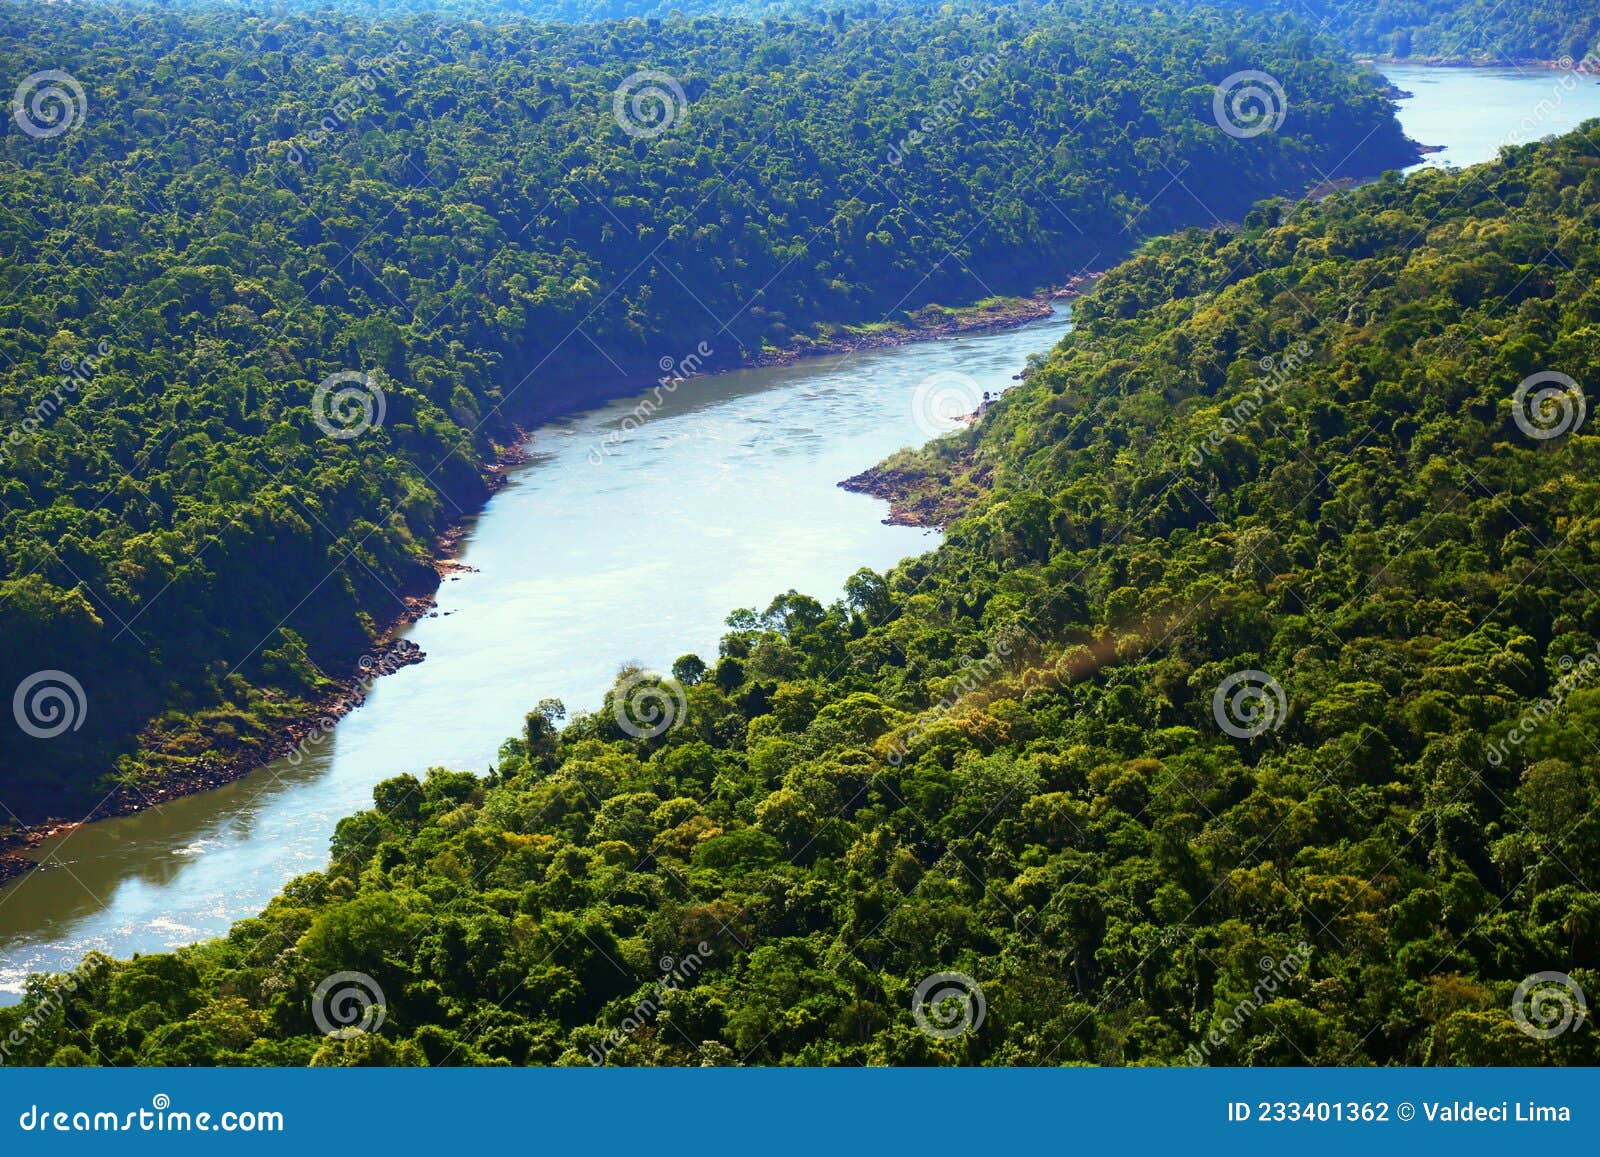 iguacu river crossing the forest. mata atlantica preserved with an aerial view. environmental protection, ecology, clean air.